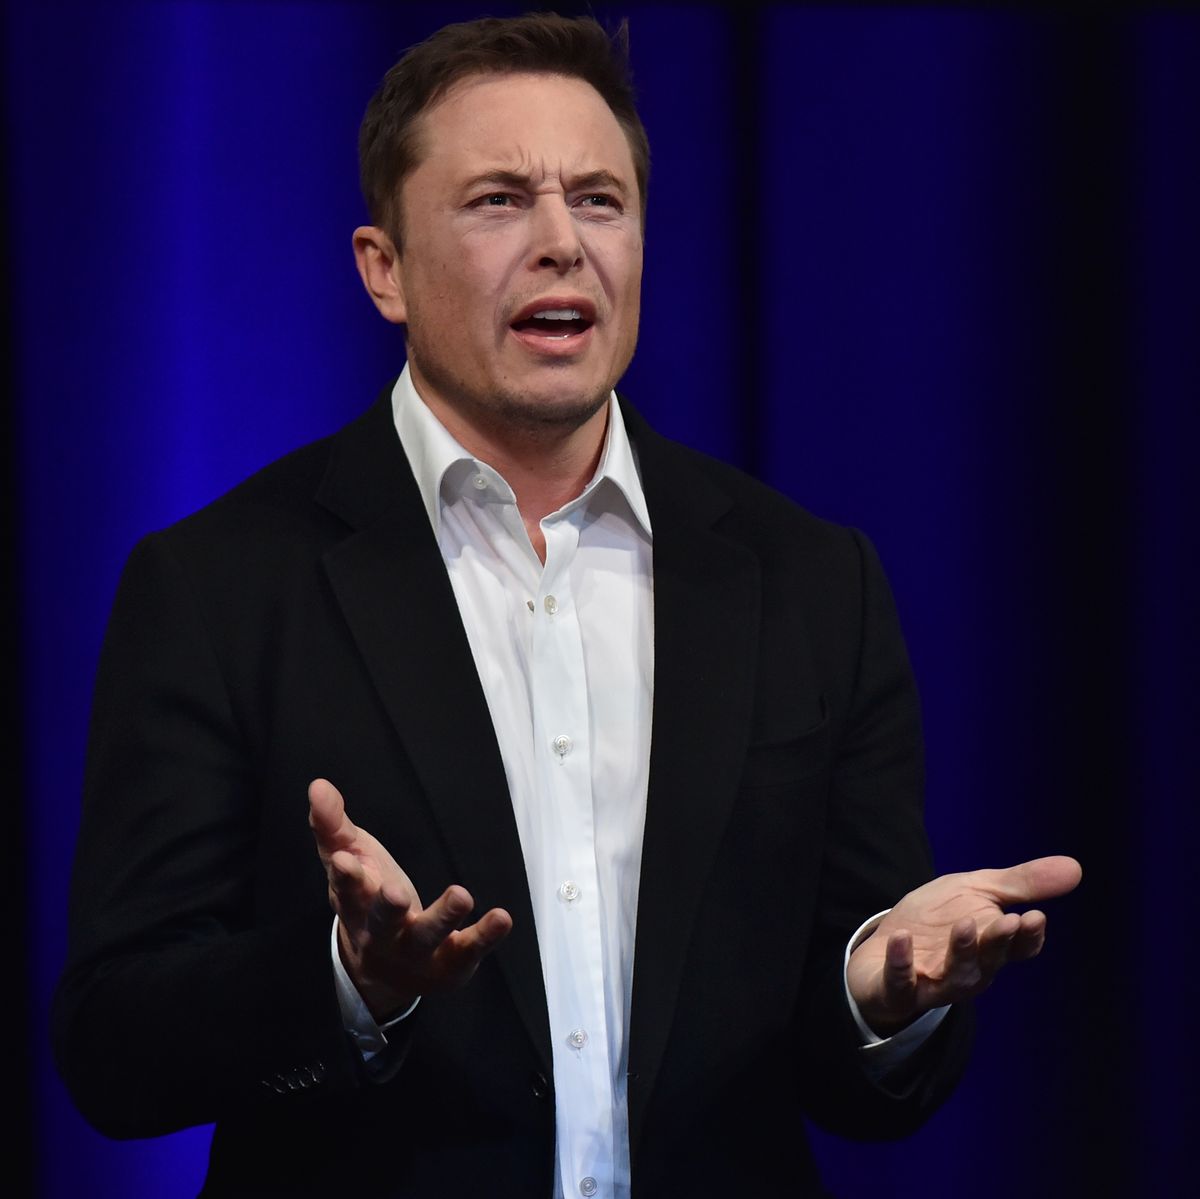 billionaire entrepreneur and founder of spacex elon musk speaks at the 68th international astronautical congress 2017 in adelaide on september 29, 2017   musk said his company spacex has begun serious work on the bfr rocket as he plans an interplanetary transport system photo by peter parks  afp        photo credit should read peter parksafp via getty images